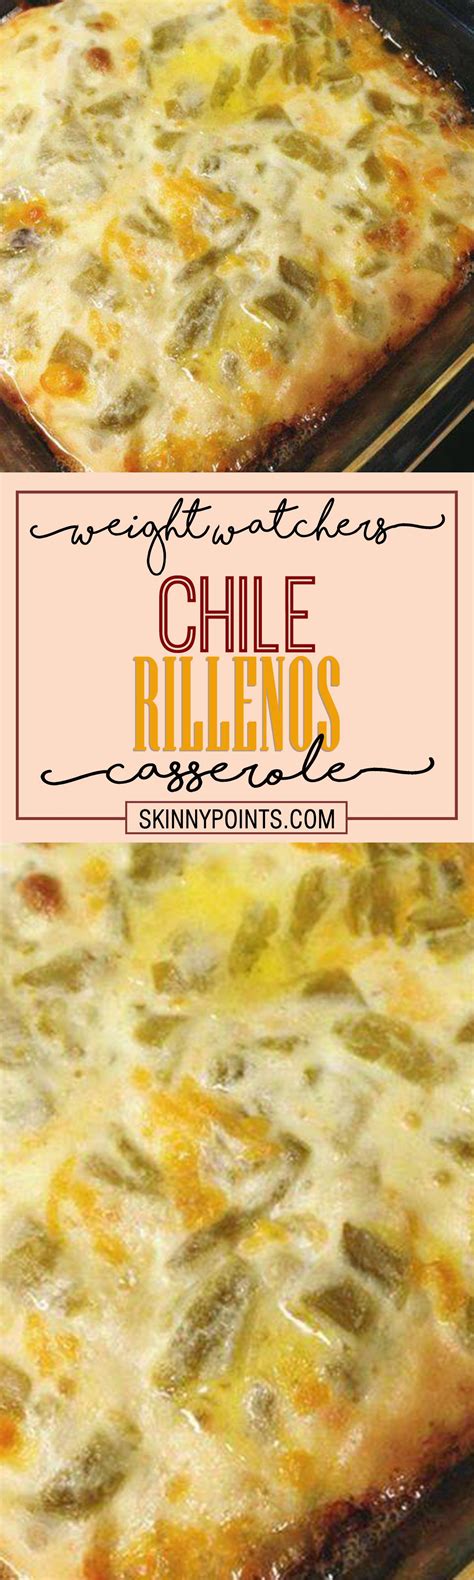 Chile Rellenos Casserole With Images Mexican Food Recipes Recipes